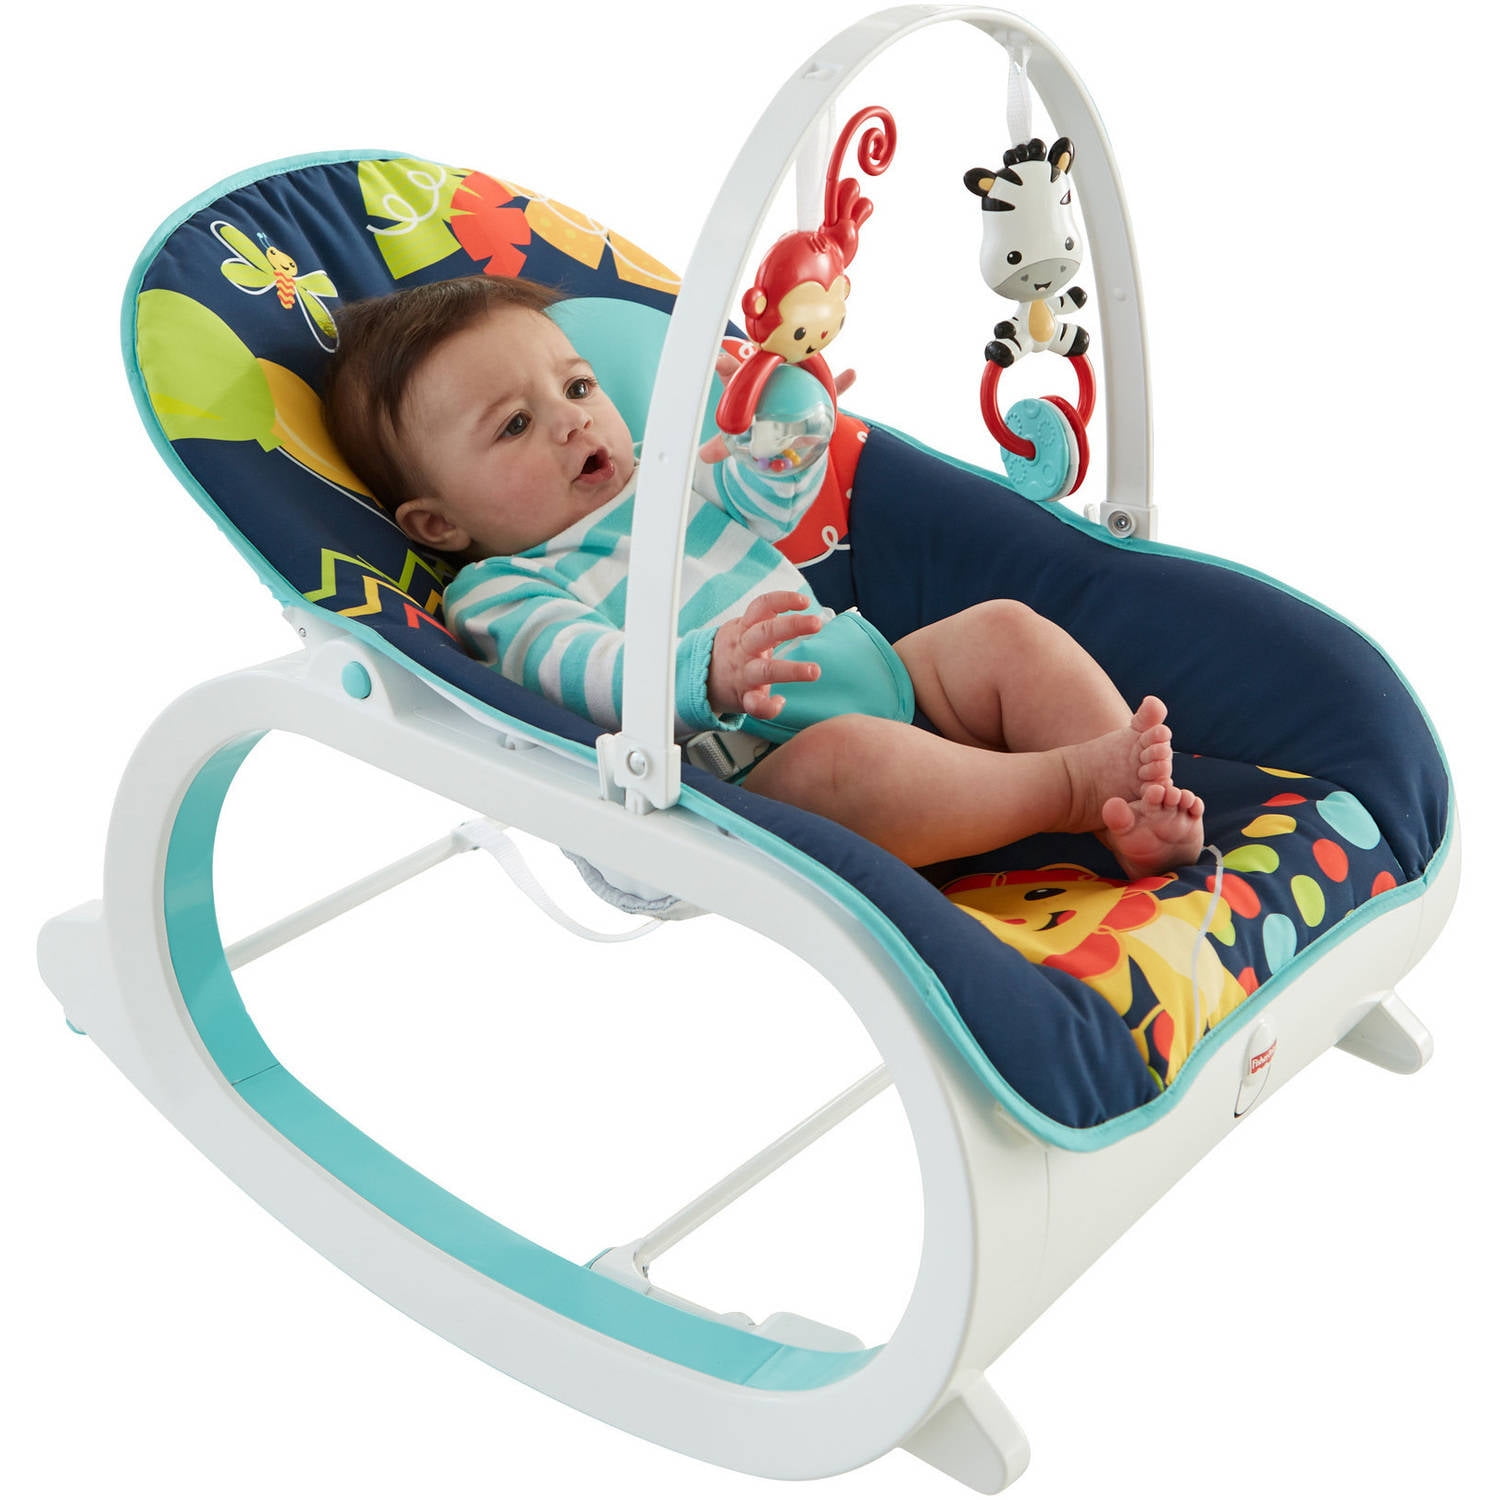 Fisher Price Infant-To-Toddler Rocker Baby Seat Bouncer Chair Play Toy